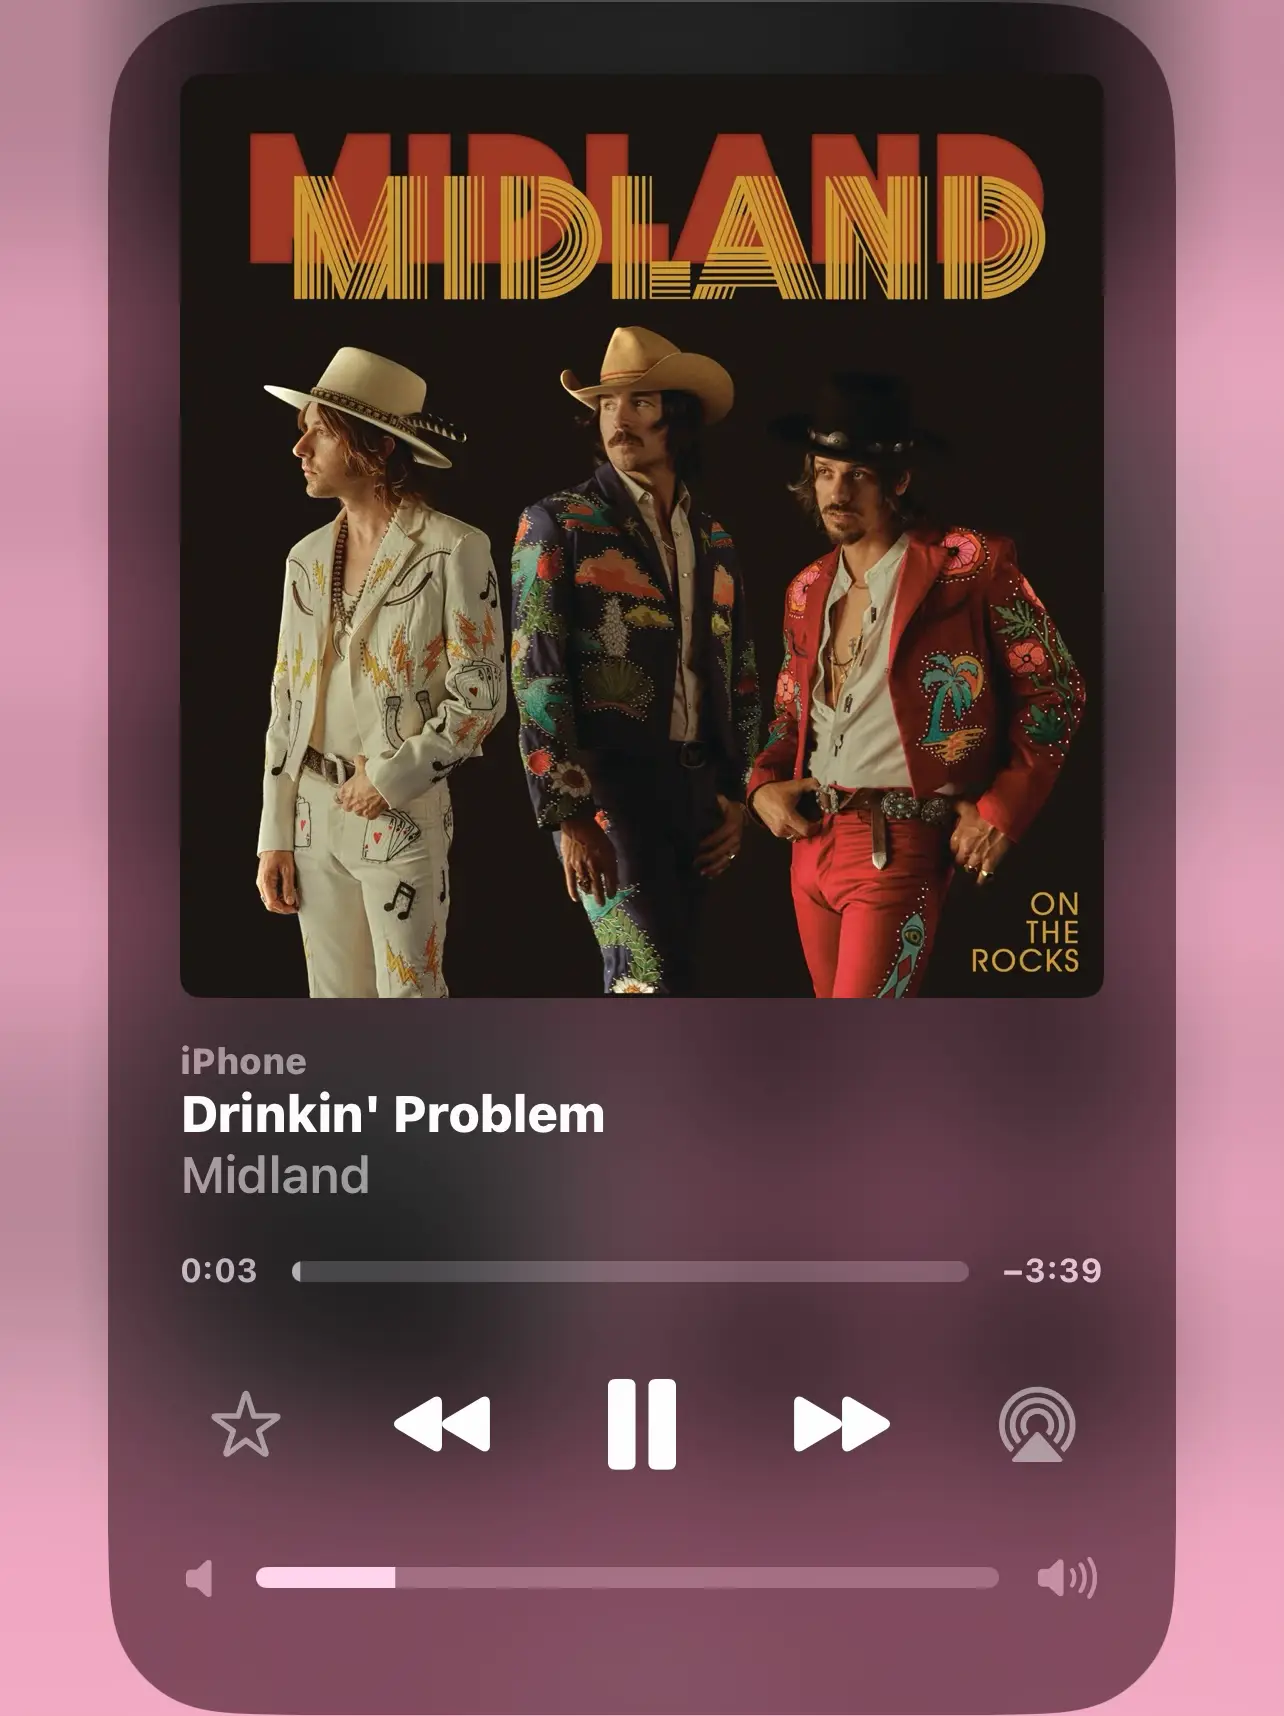  A picture of a band with the words "Midland" on it.